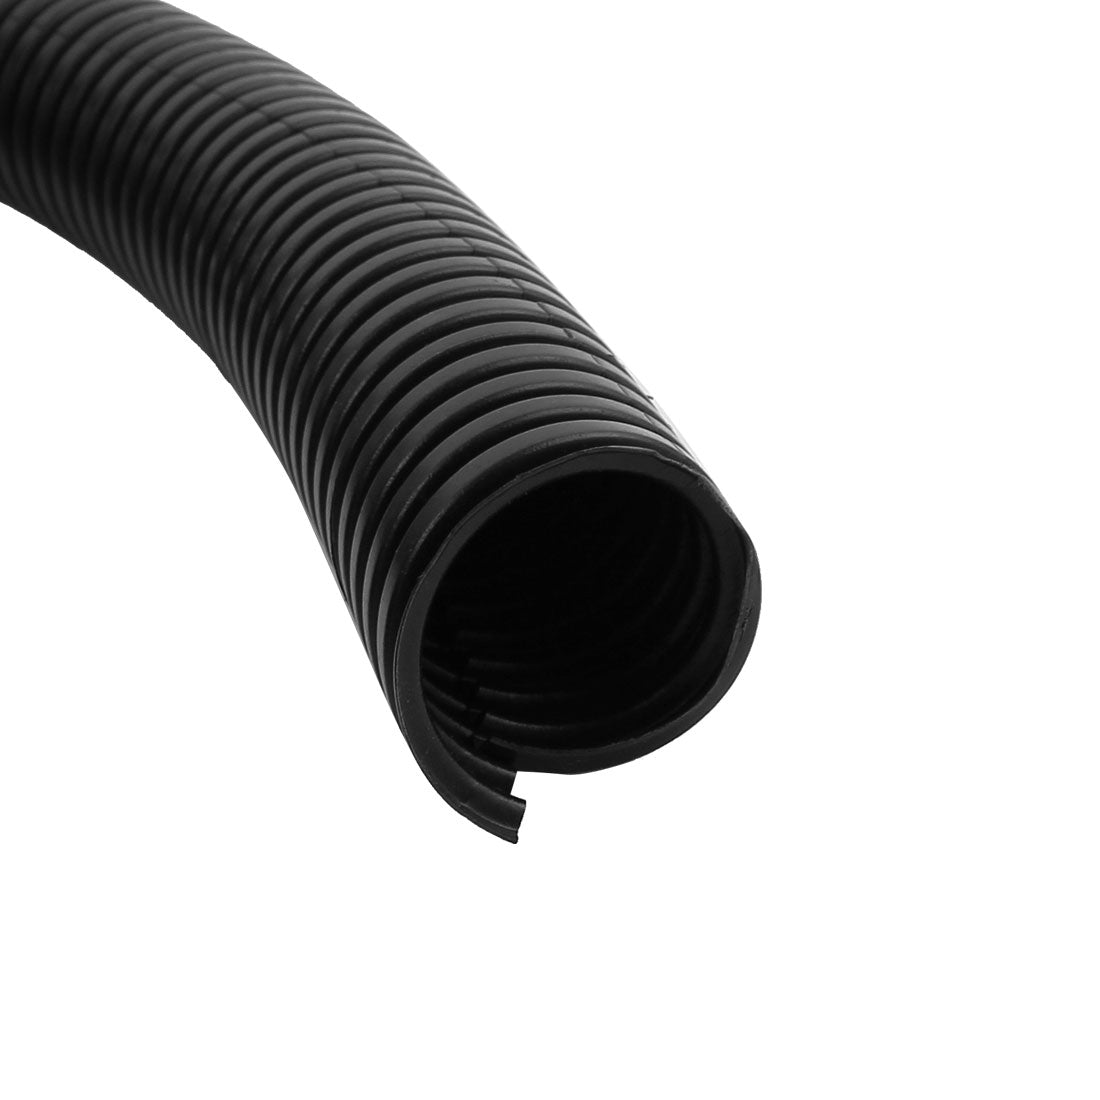 uxcell Uxcell 9.5 M 25 x 28 mm PVC Split Corrugated Conduit Tube for Garden,Office Black